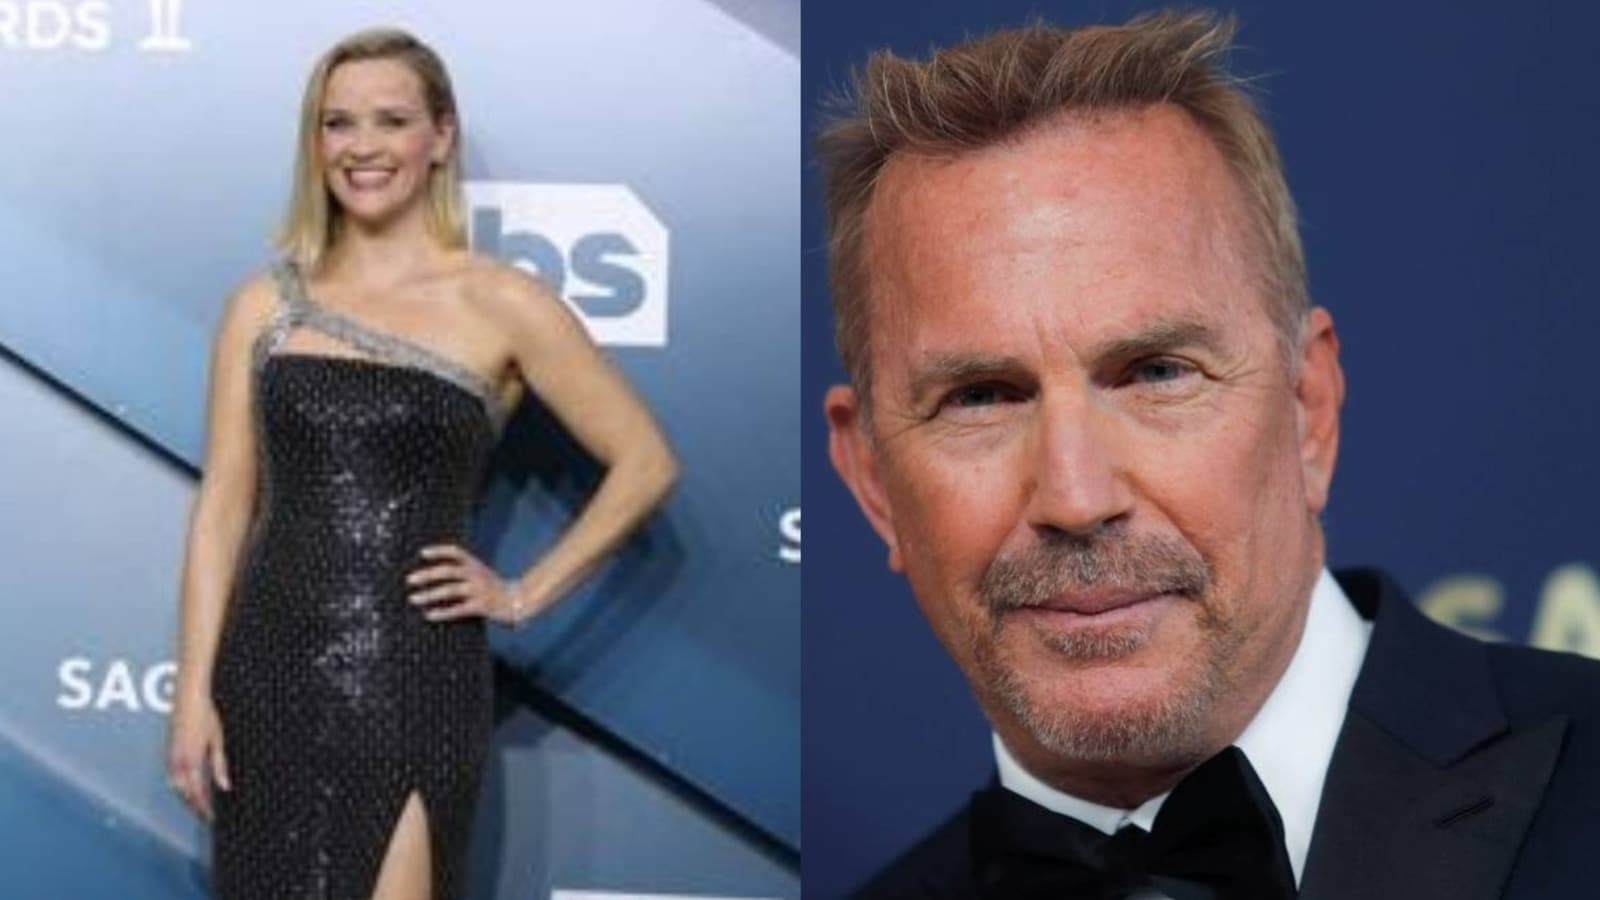 Kevin Costner and Witherspoon are dating after split from respective partners | Hollywood